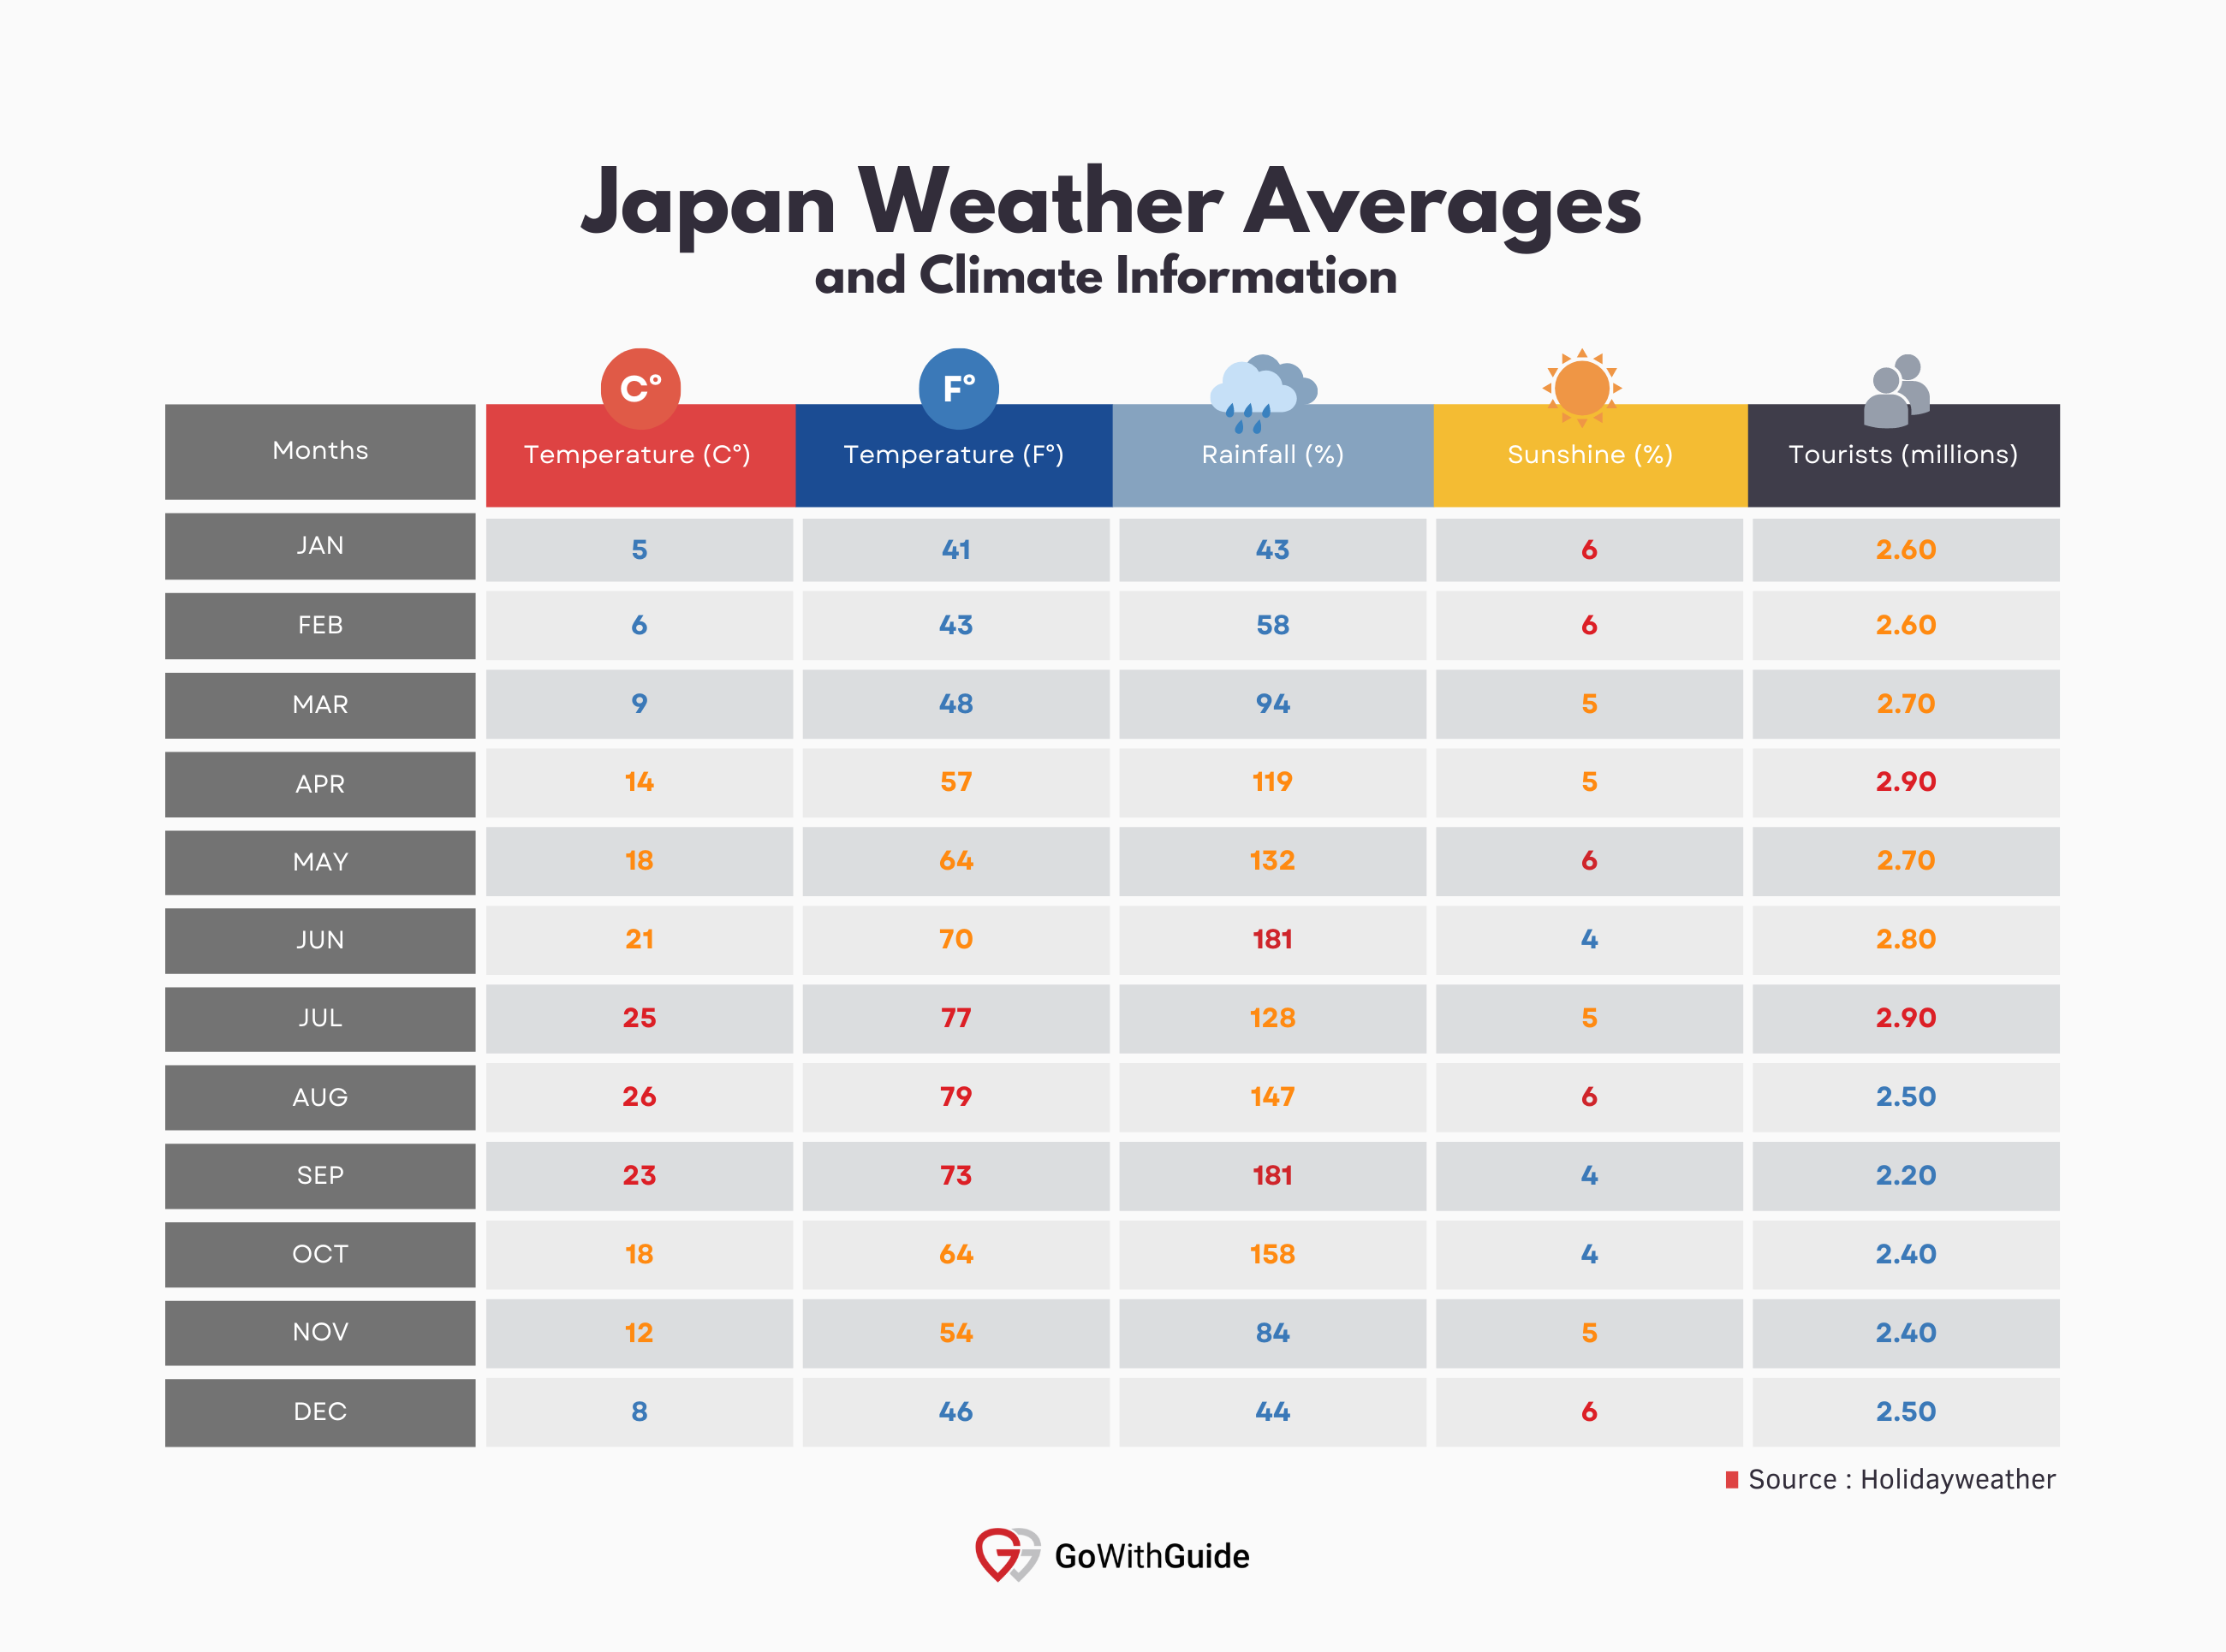 Japan Annual Weather Averages